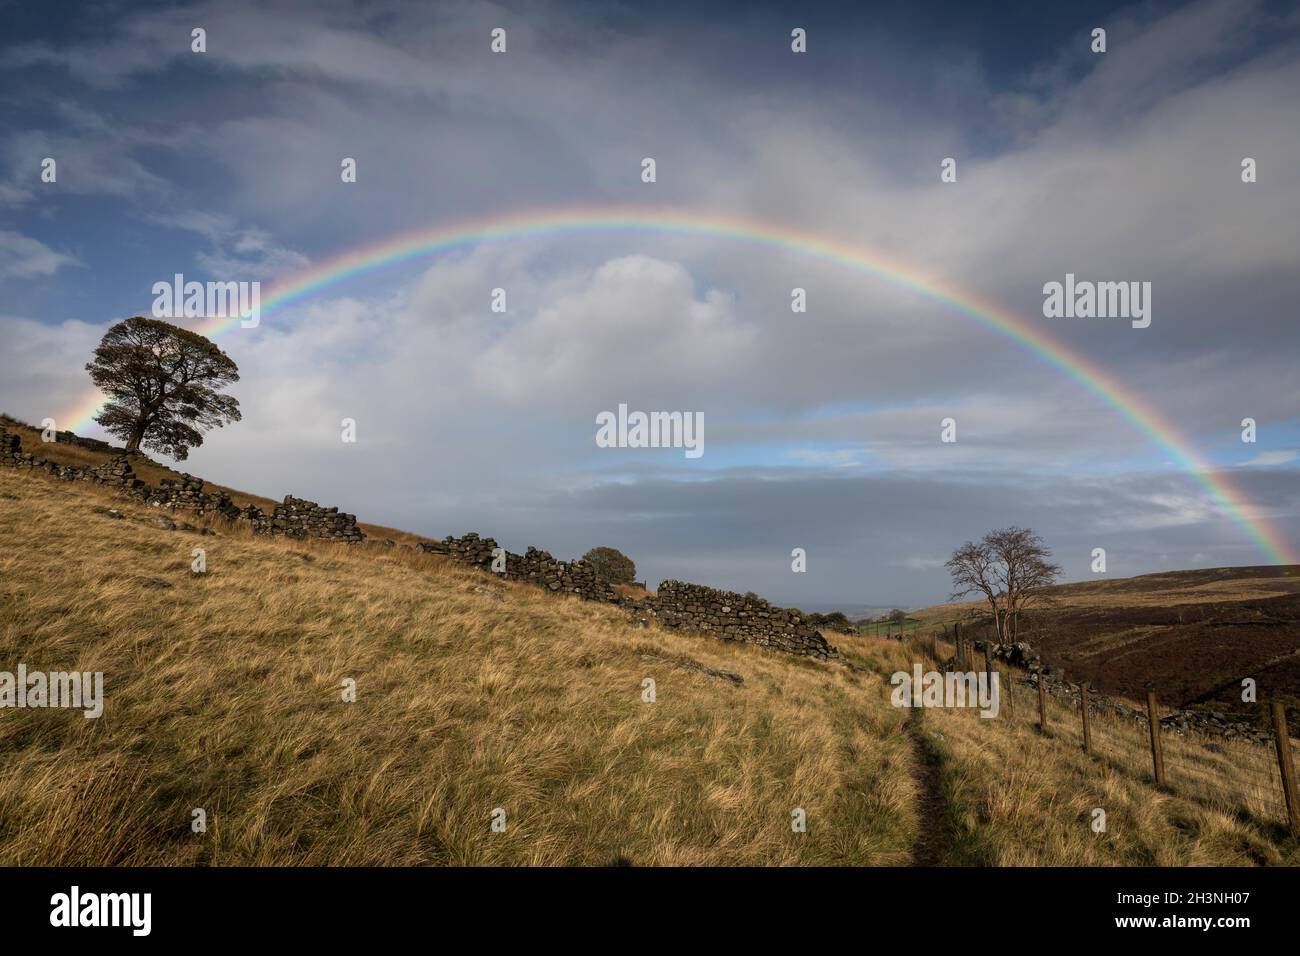 A rainbow over the Brontë moors in West Yorkshire Stock Photo